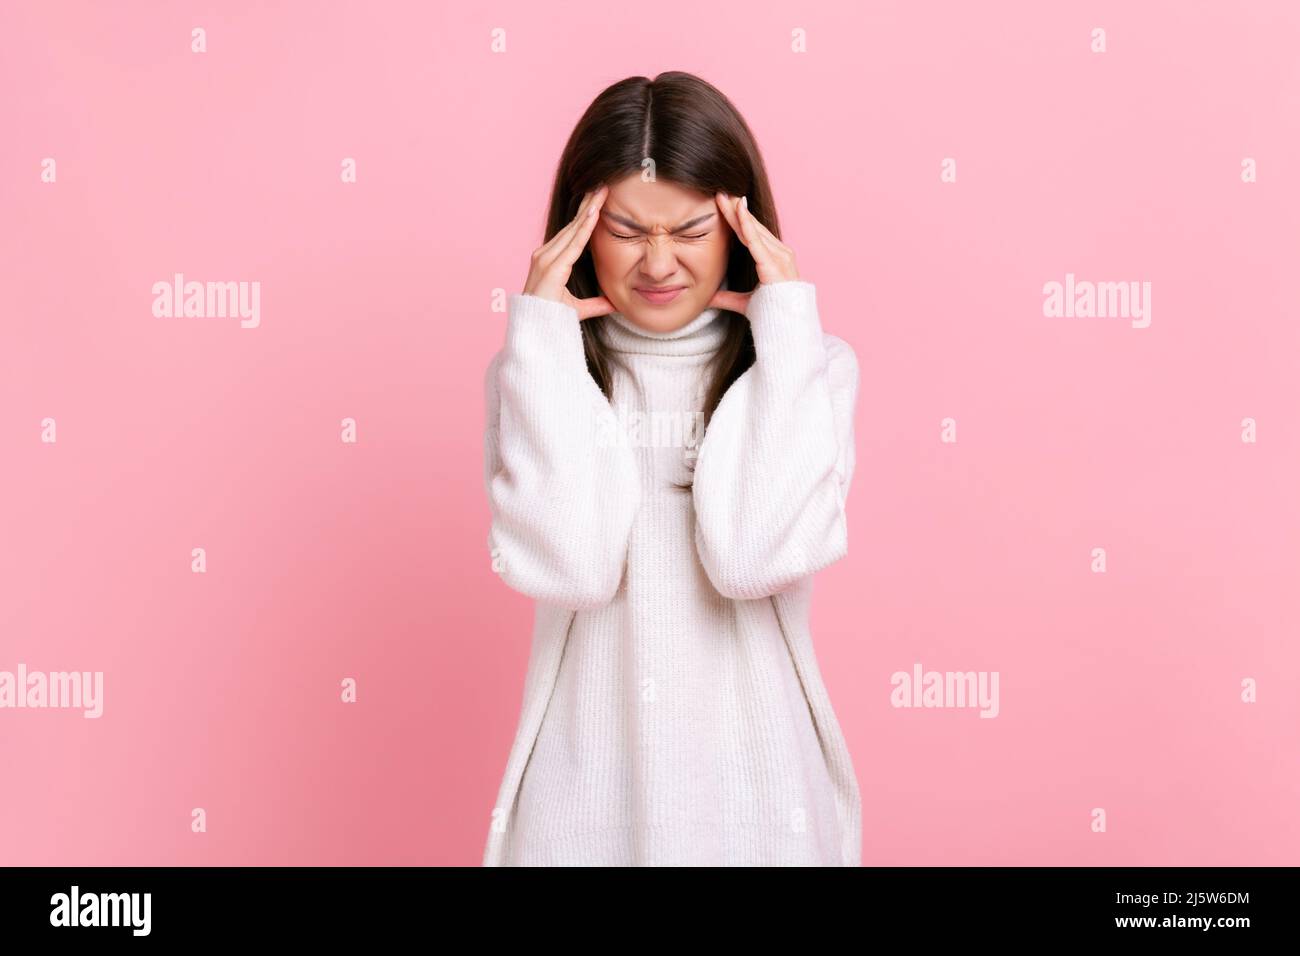 Woman frowning and clasping sore head, suffering intense headache, having migraine, fever symptoms, wearing white casual style sweater. Indoor studio shot isolated on pink background. Stock Photo